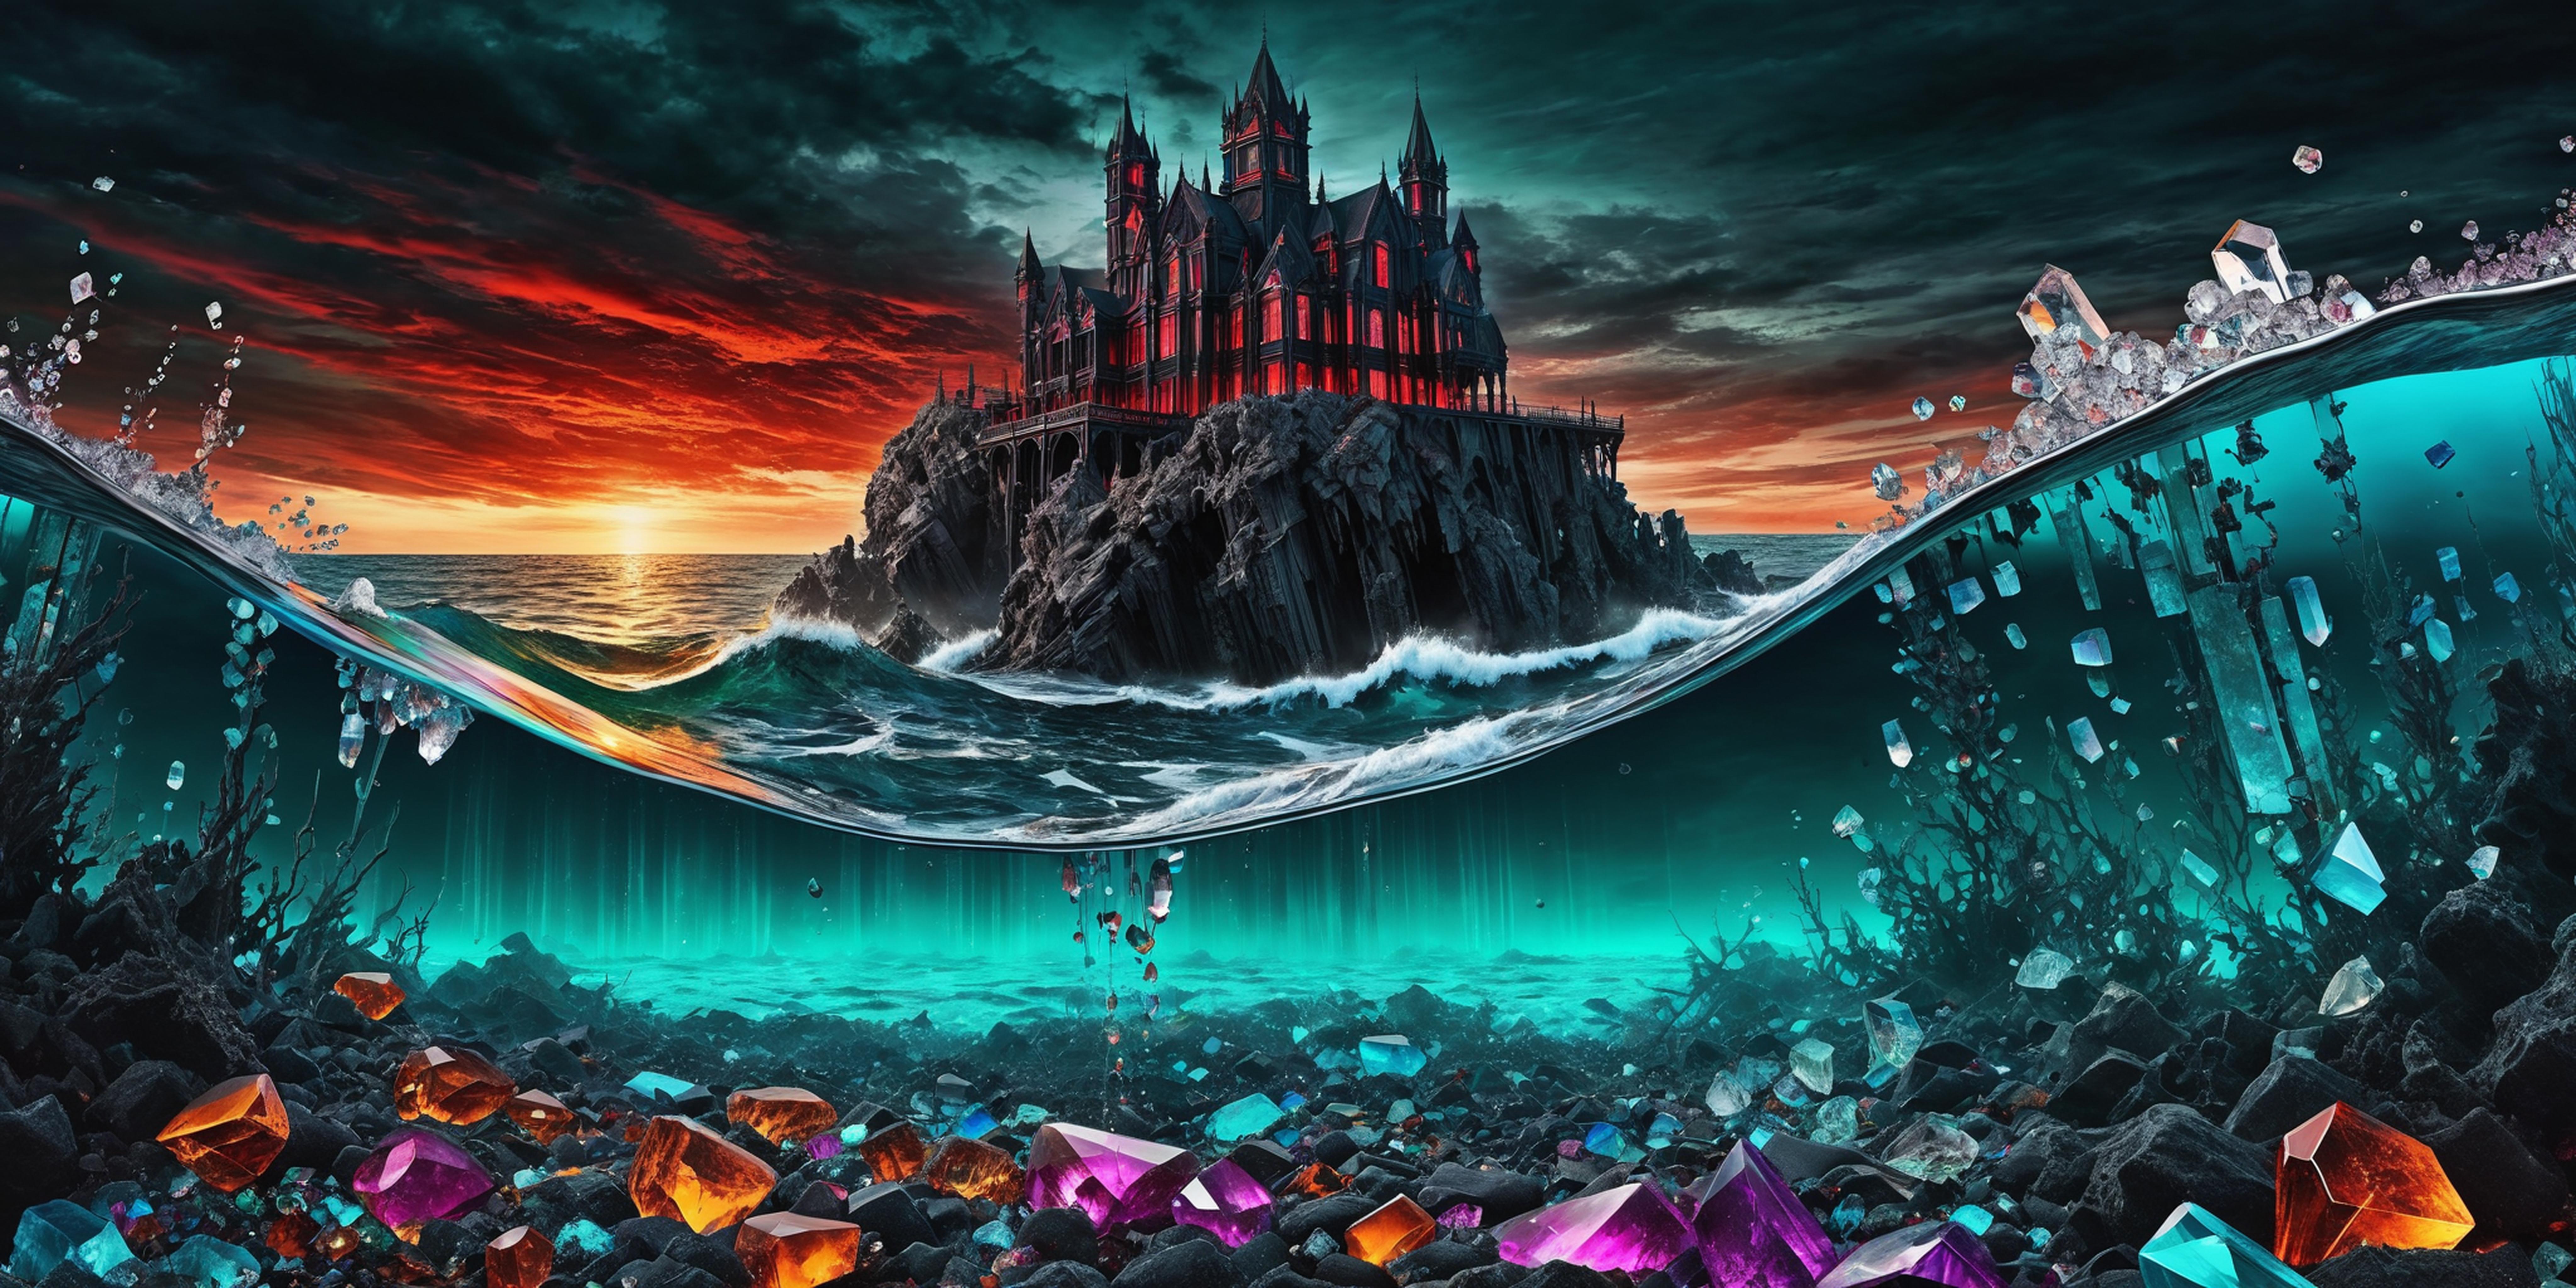 Ocean waves crashing against a castle with a rocky base and a sunset in the background. The castle is surrounded by rocks and gems, creating a picturesque and dramatic scene.